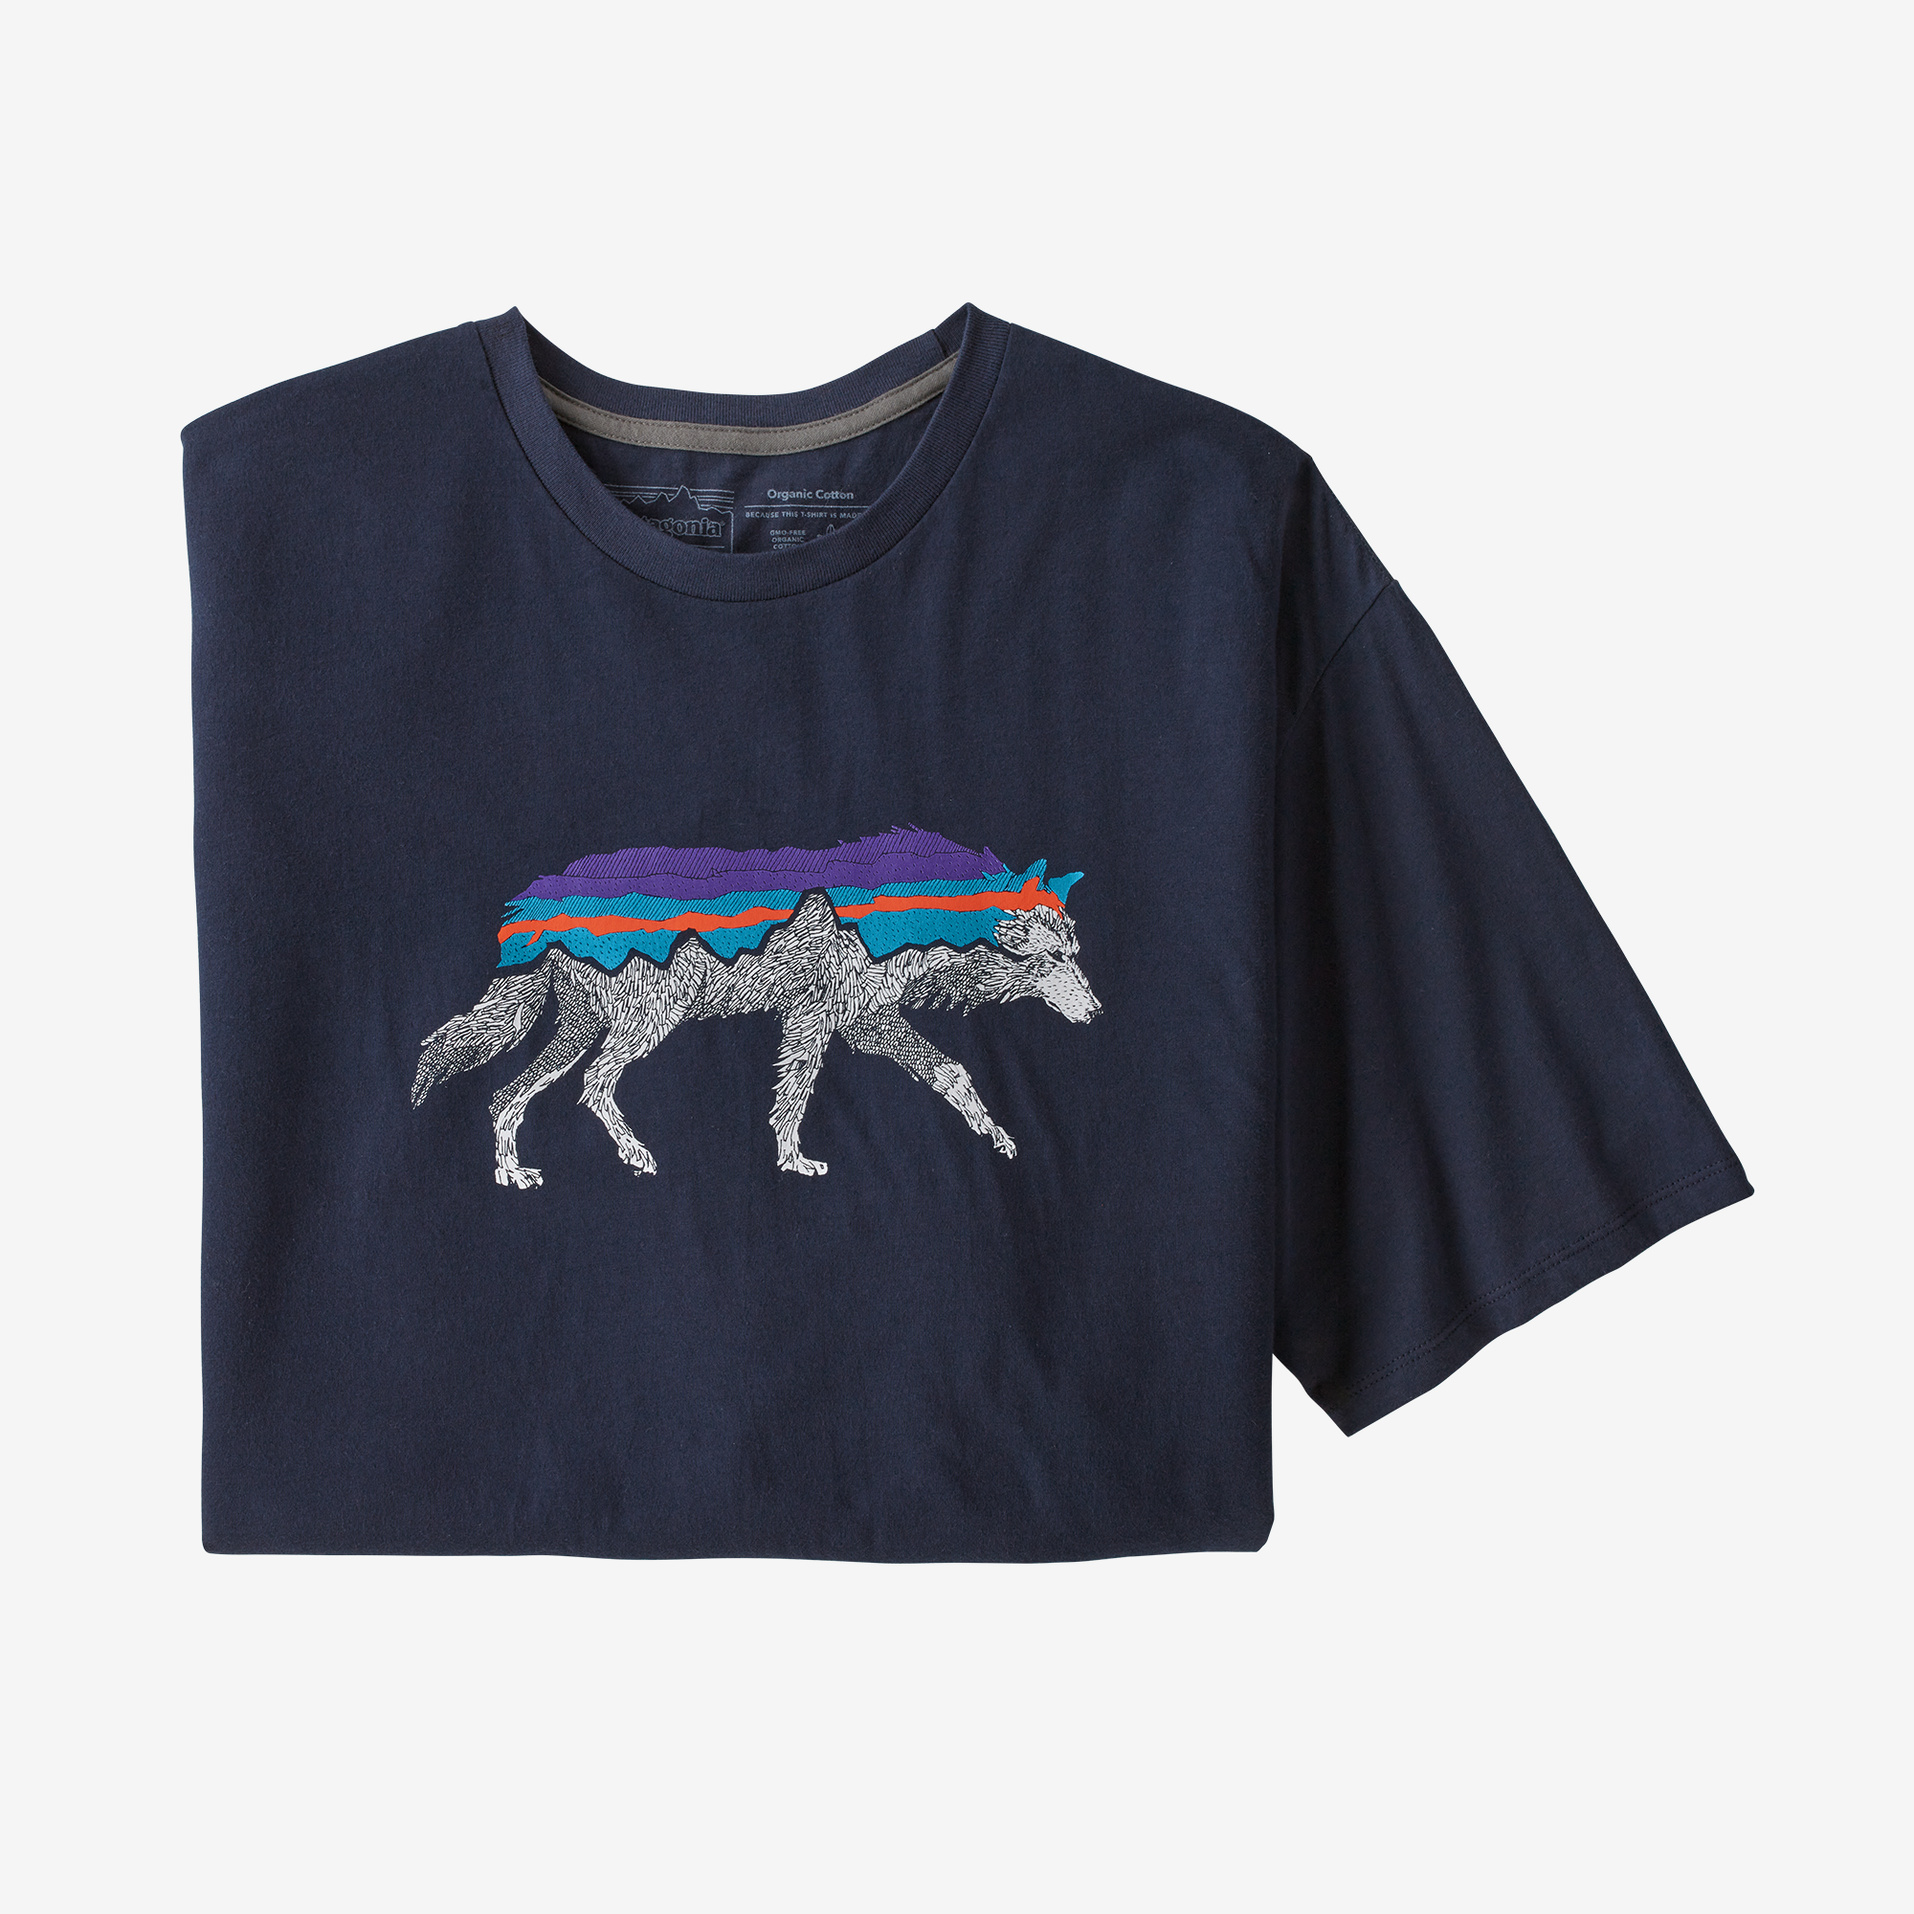 Patagonia M's Back For Good Organic T-Shirt - New Navy w/ Wolf - XL